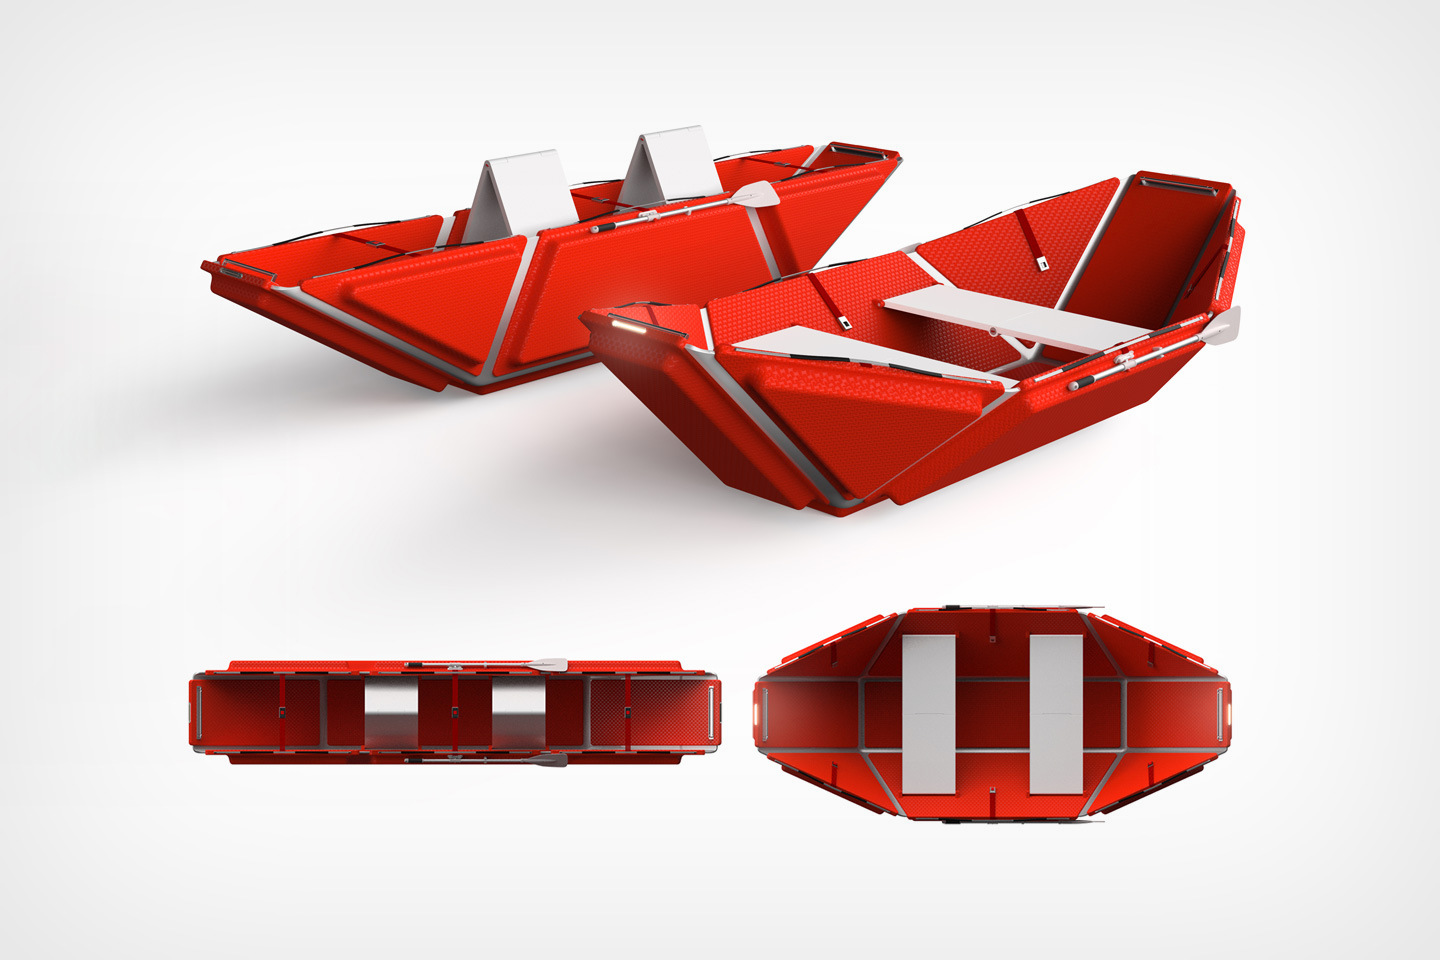 #Origami lifeboat can be flat-packed while storing, and opened on command